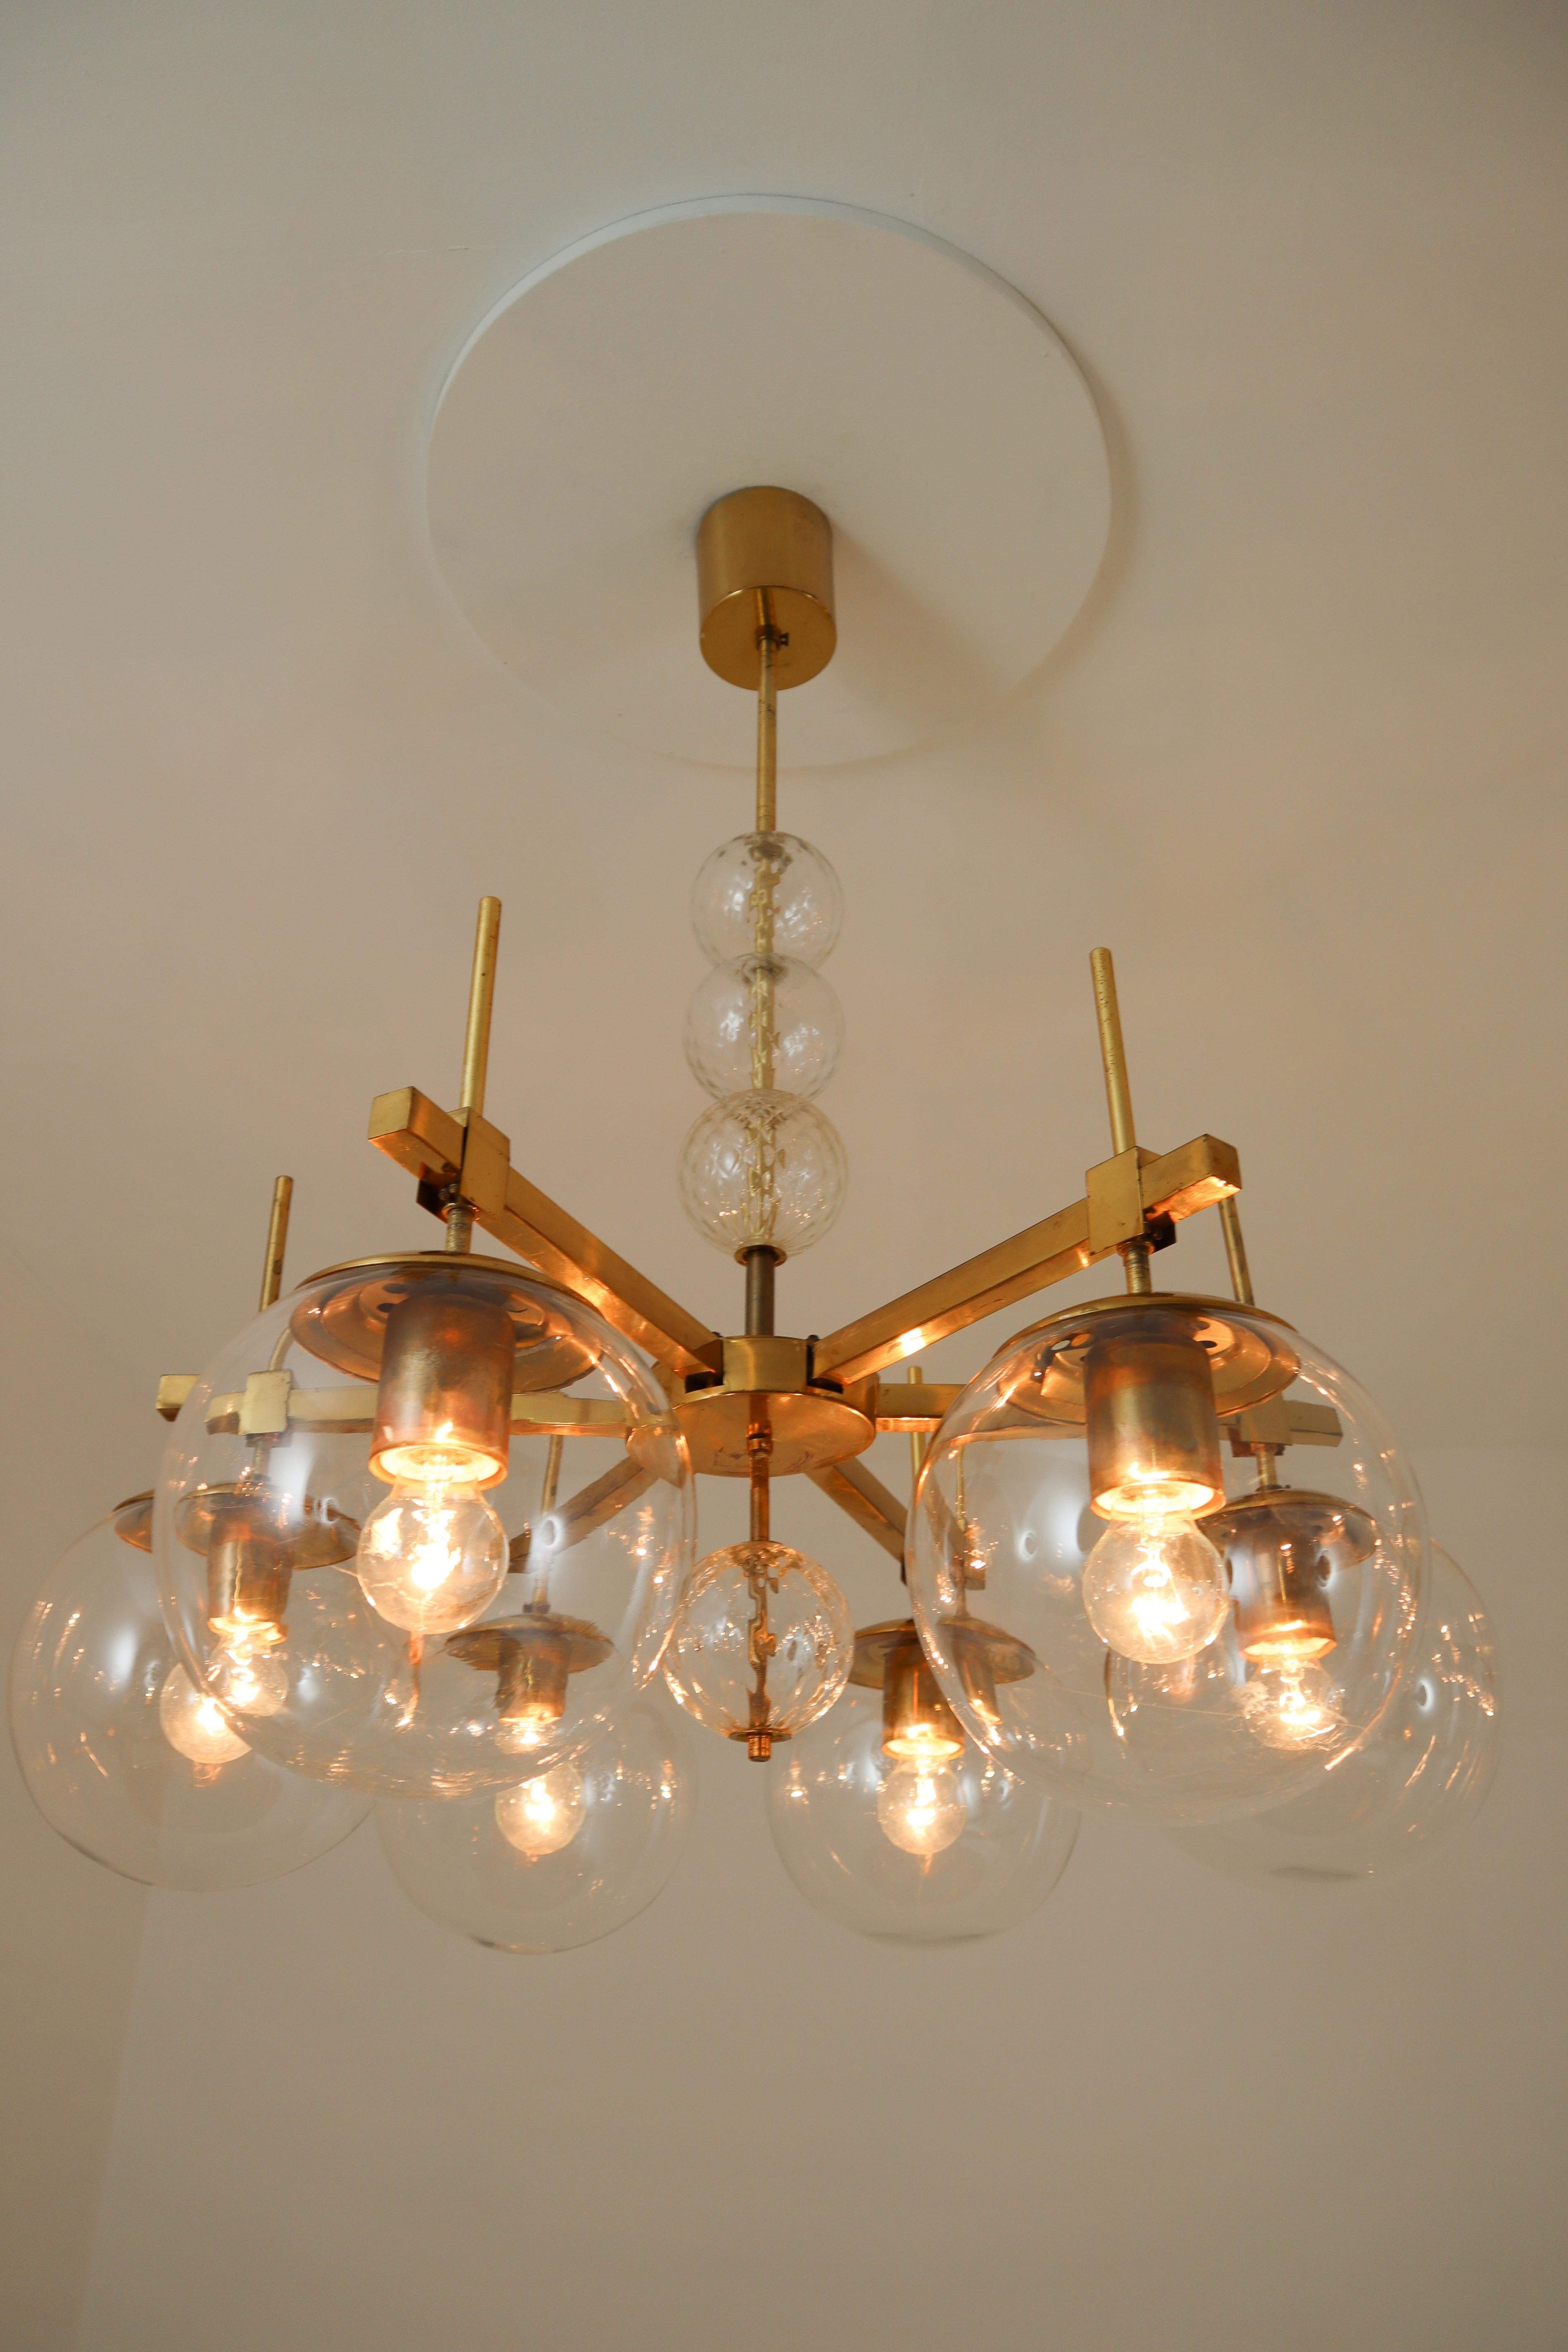 Hollywood Regency Midcentury Chandelier with Brass Fixture and Hand Blown Glass, Europe